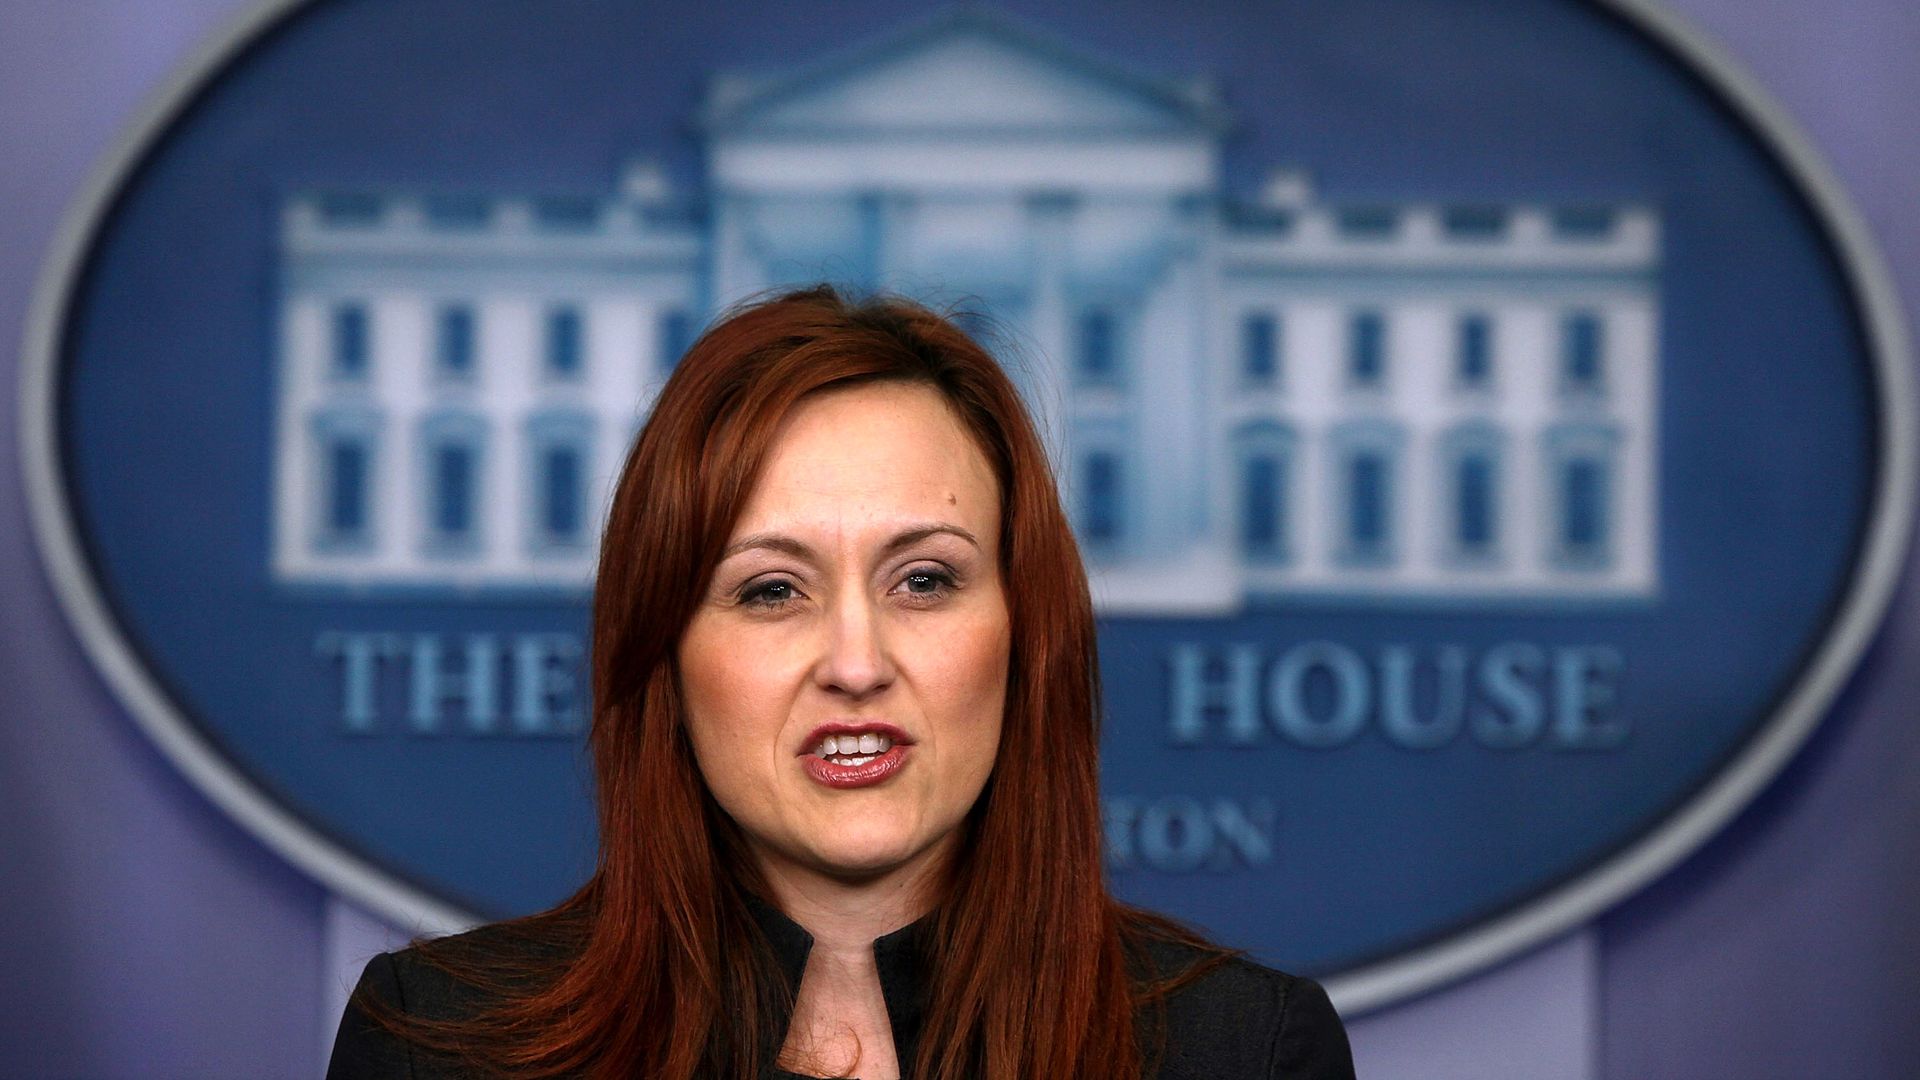 Heather Zichal in March 2012 at the White House.